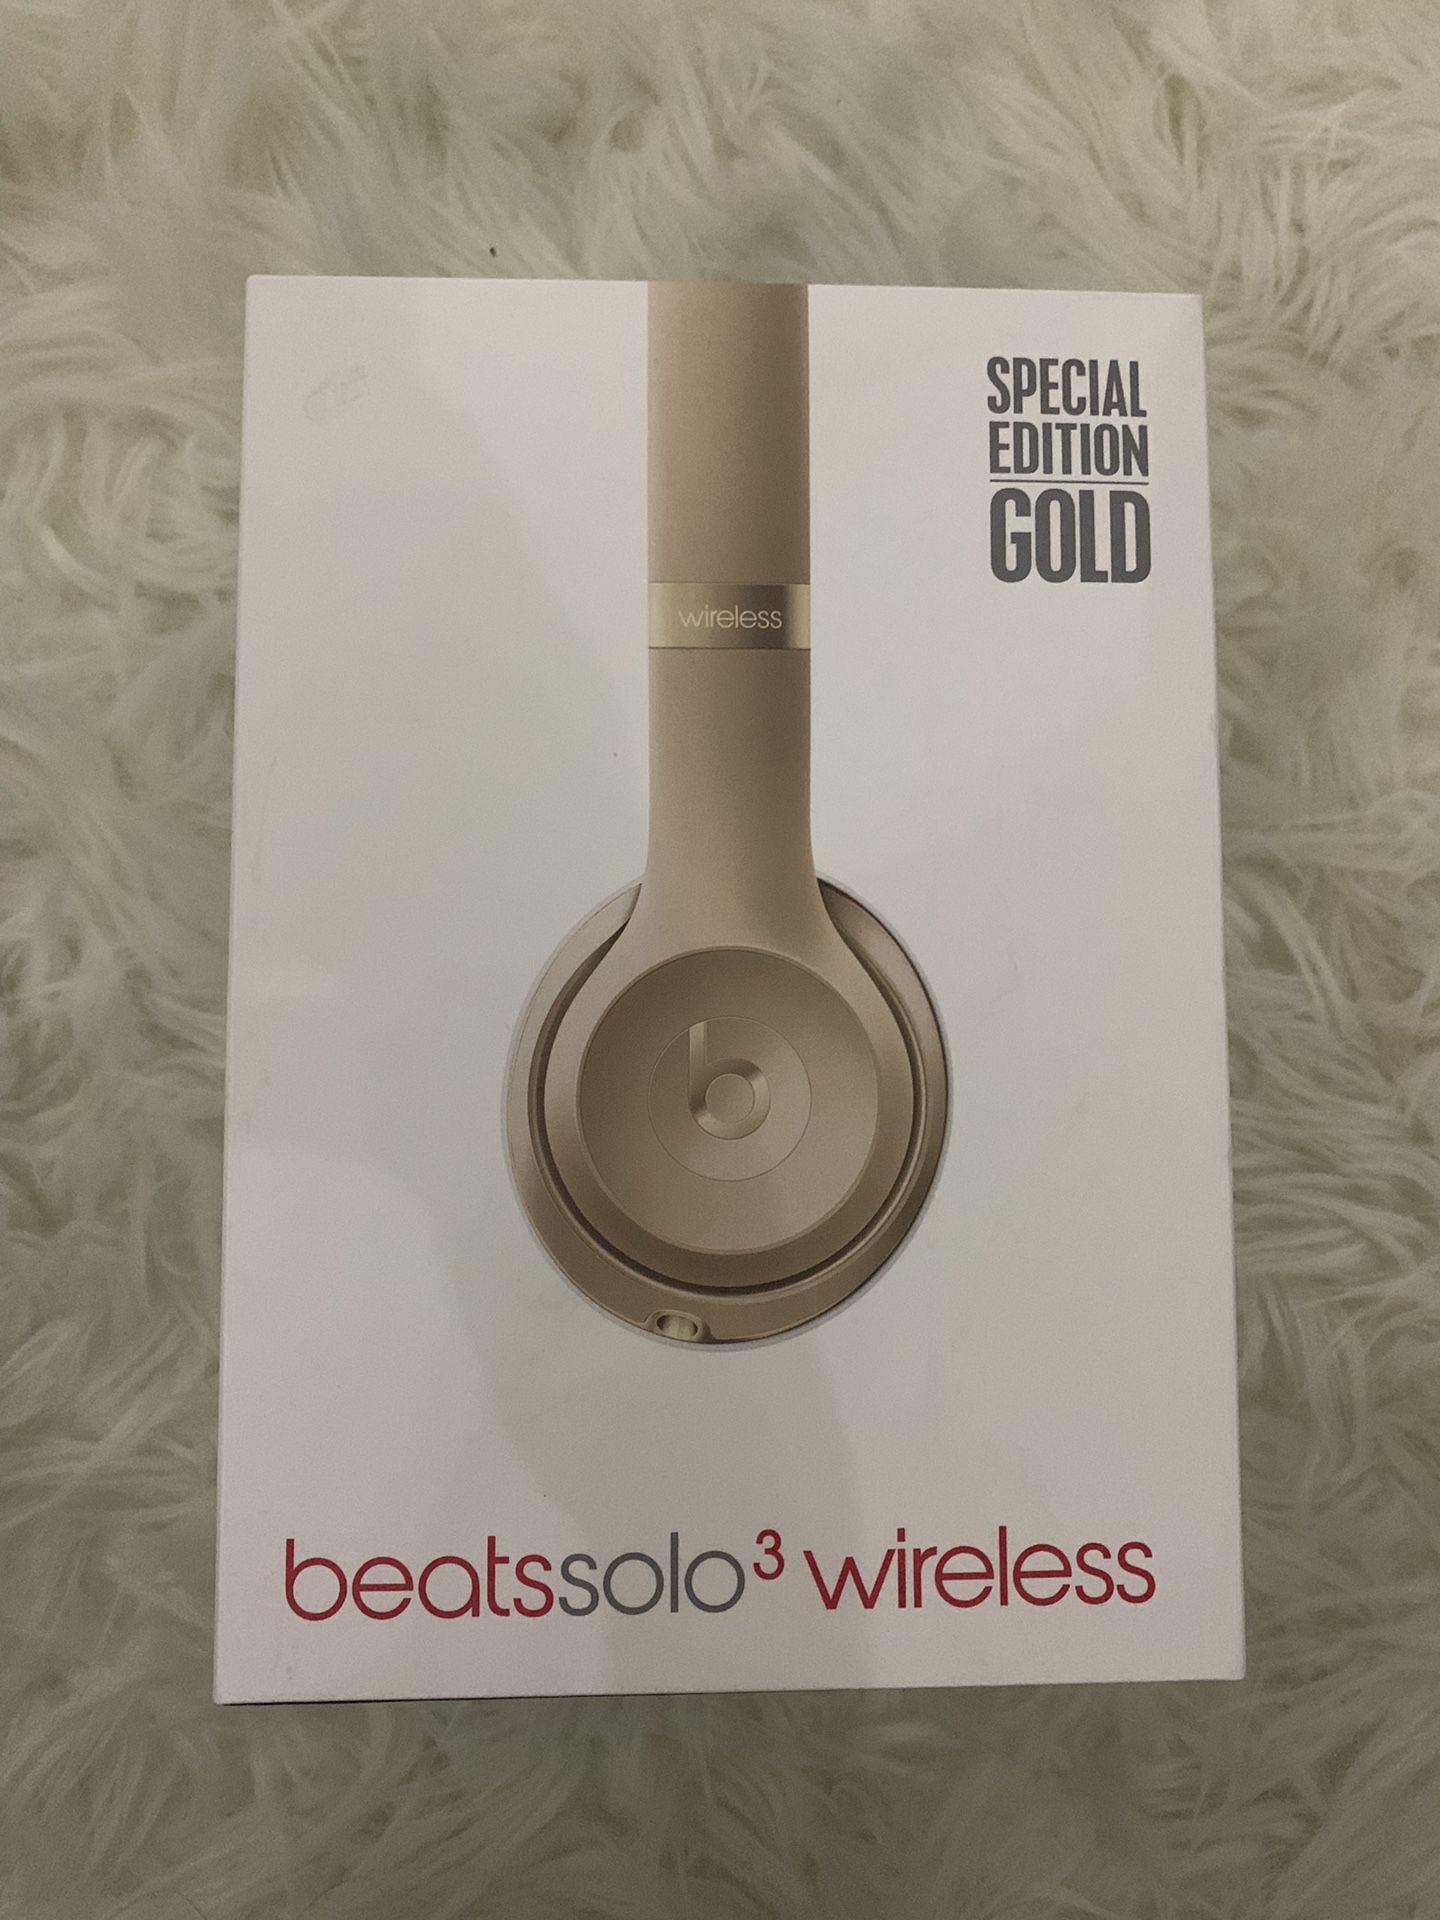 Beats by Dre Gold edition